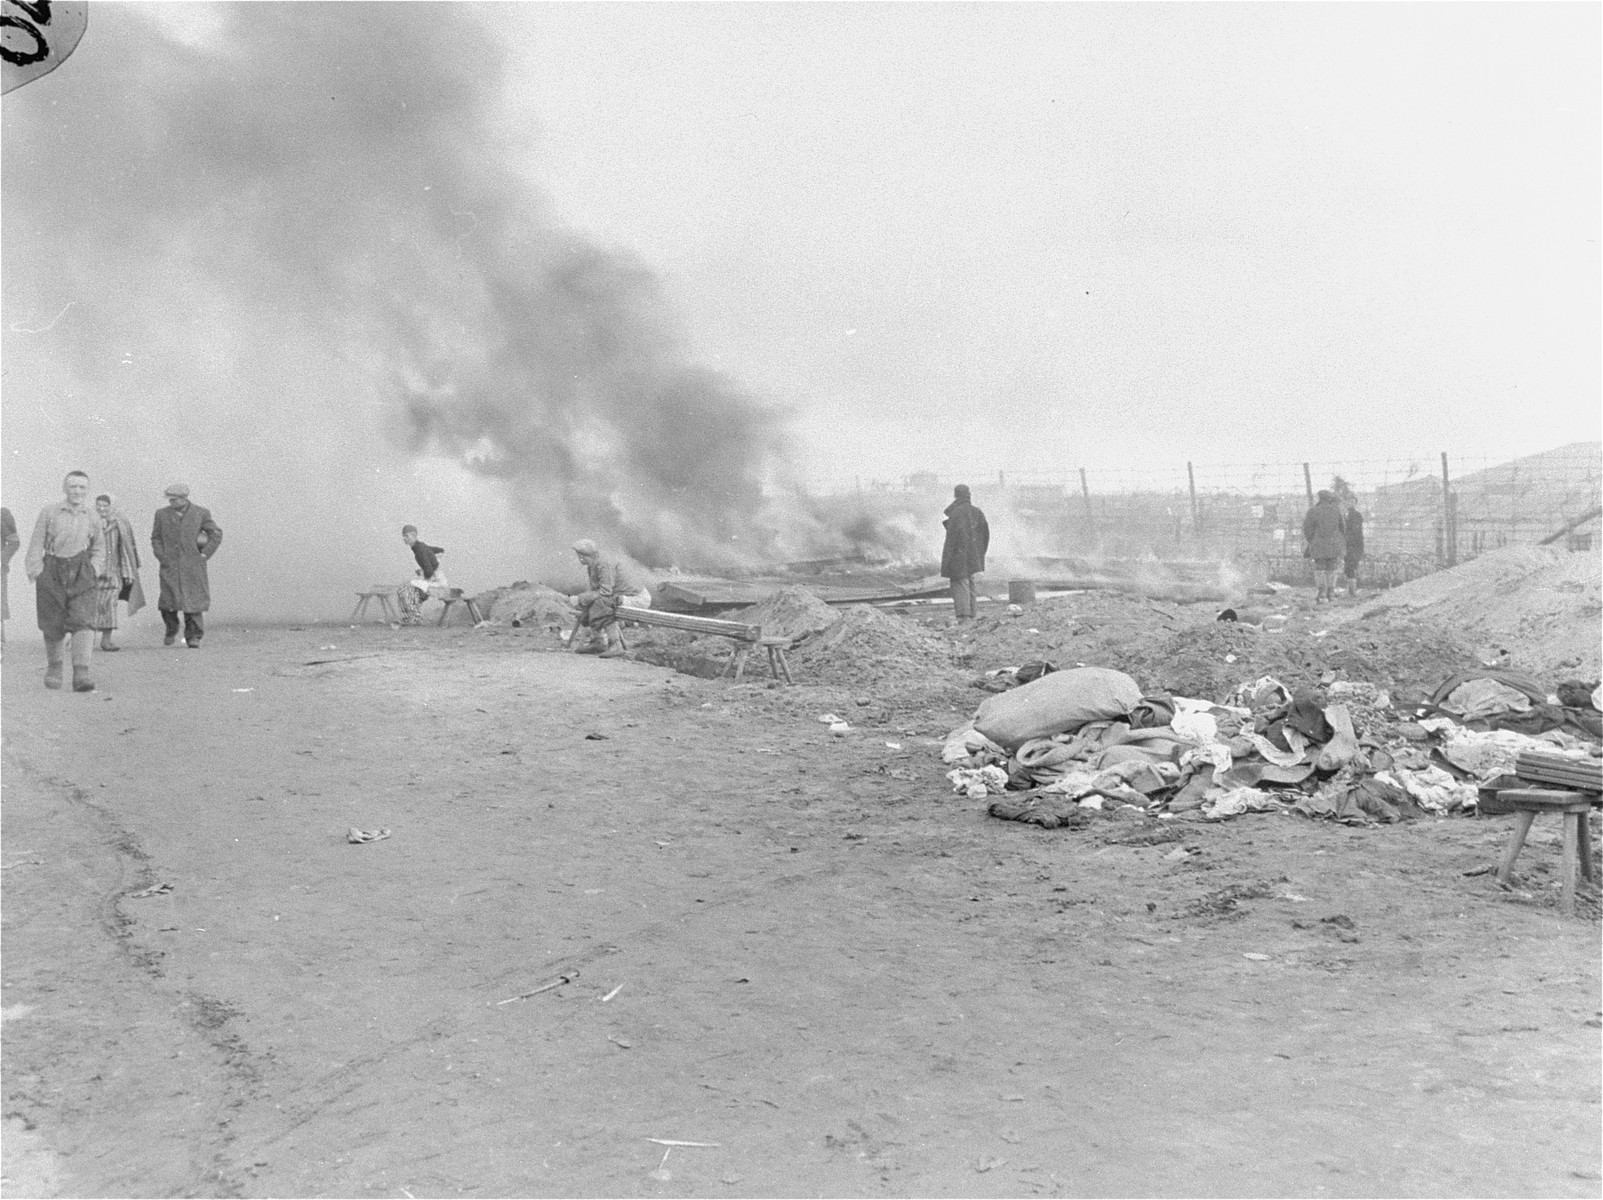 Billows of smoke rise up to the sky from typhus-infested barracks in Bergen-Belsen that have been torched by the British military.  A group of survivors move about just in front of the smoke.